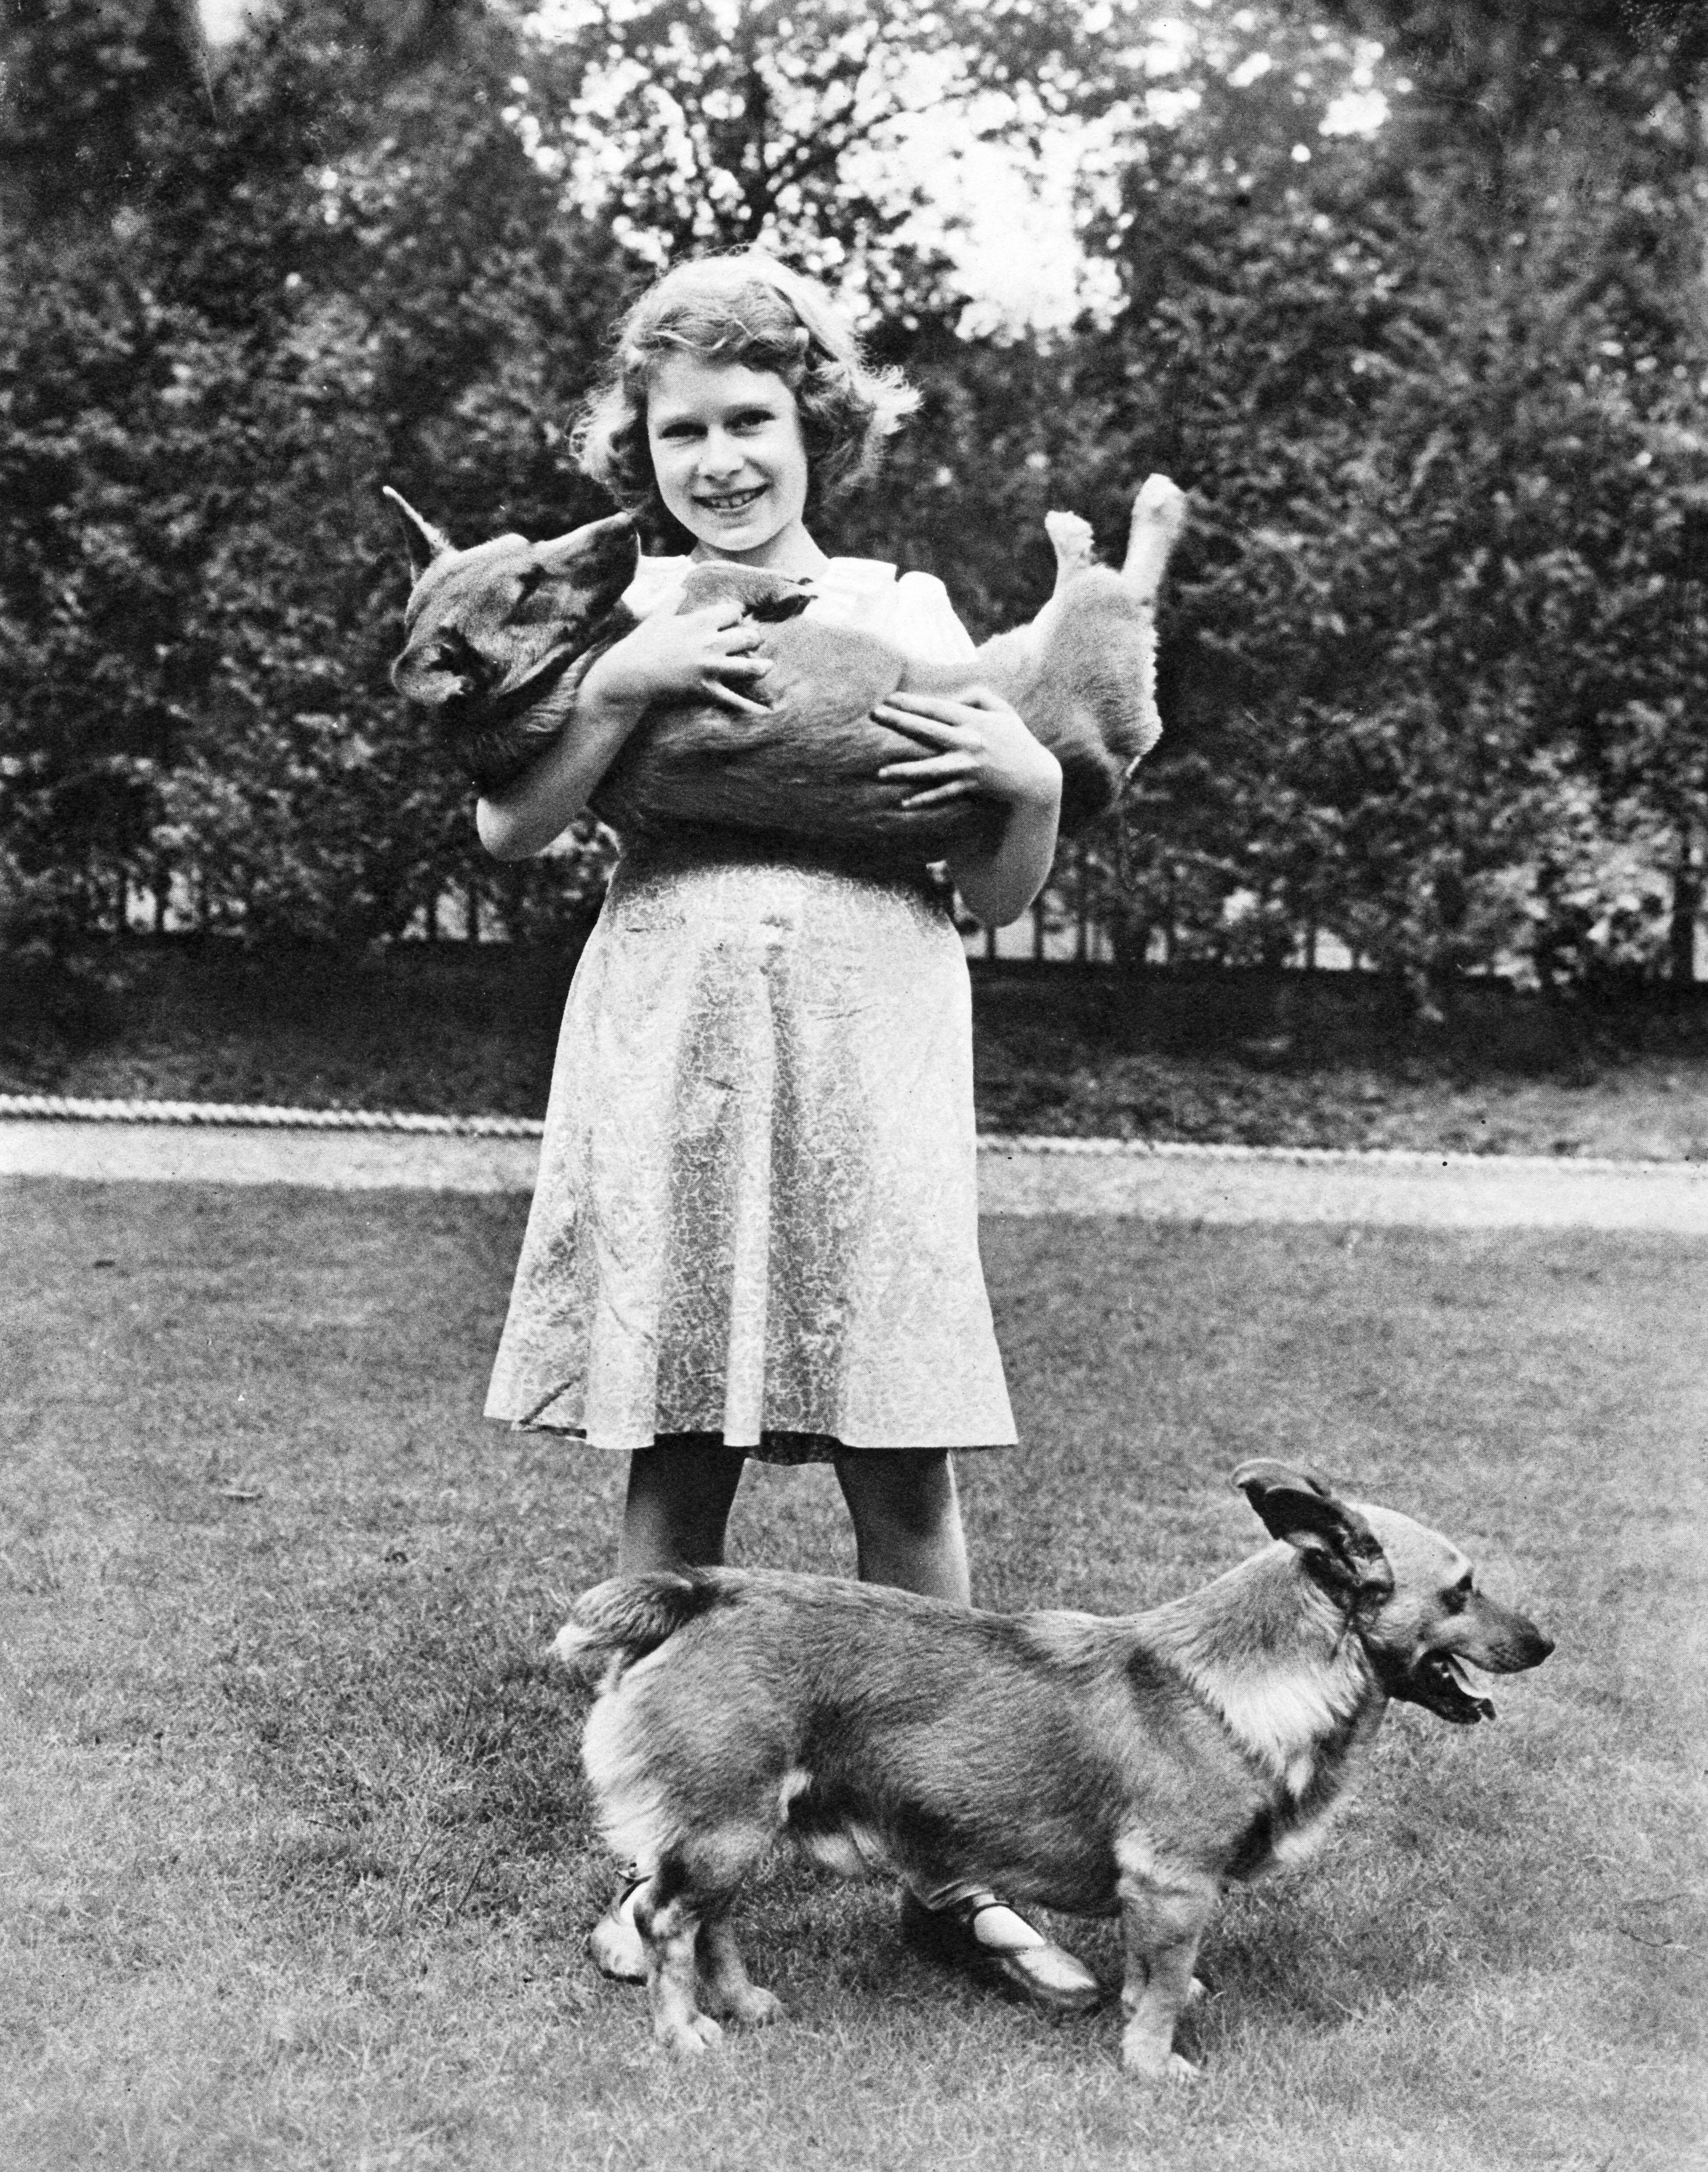 Queen Elizabeth as a girl smiling and holding one of her corgis, with another standing on the grass in front of her